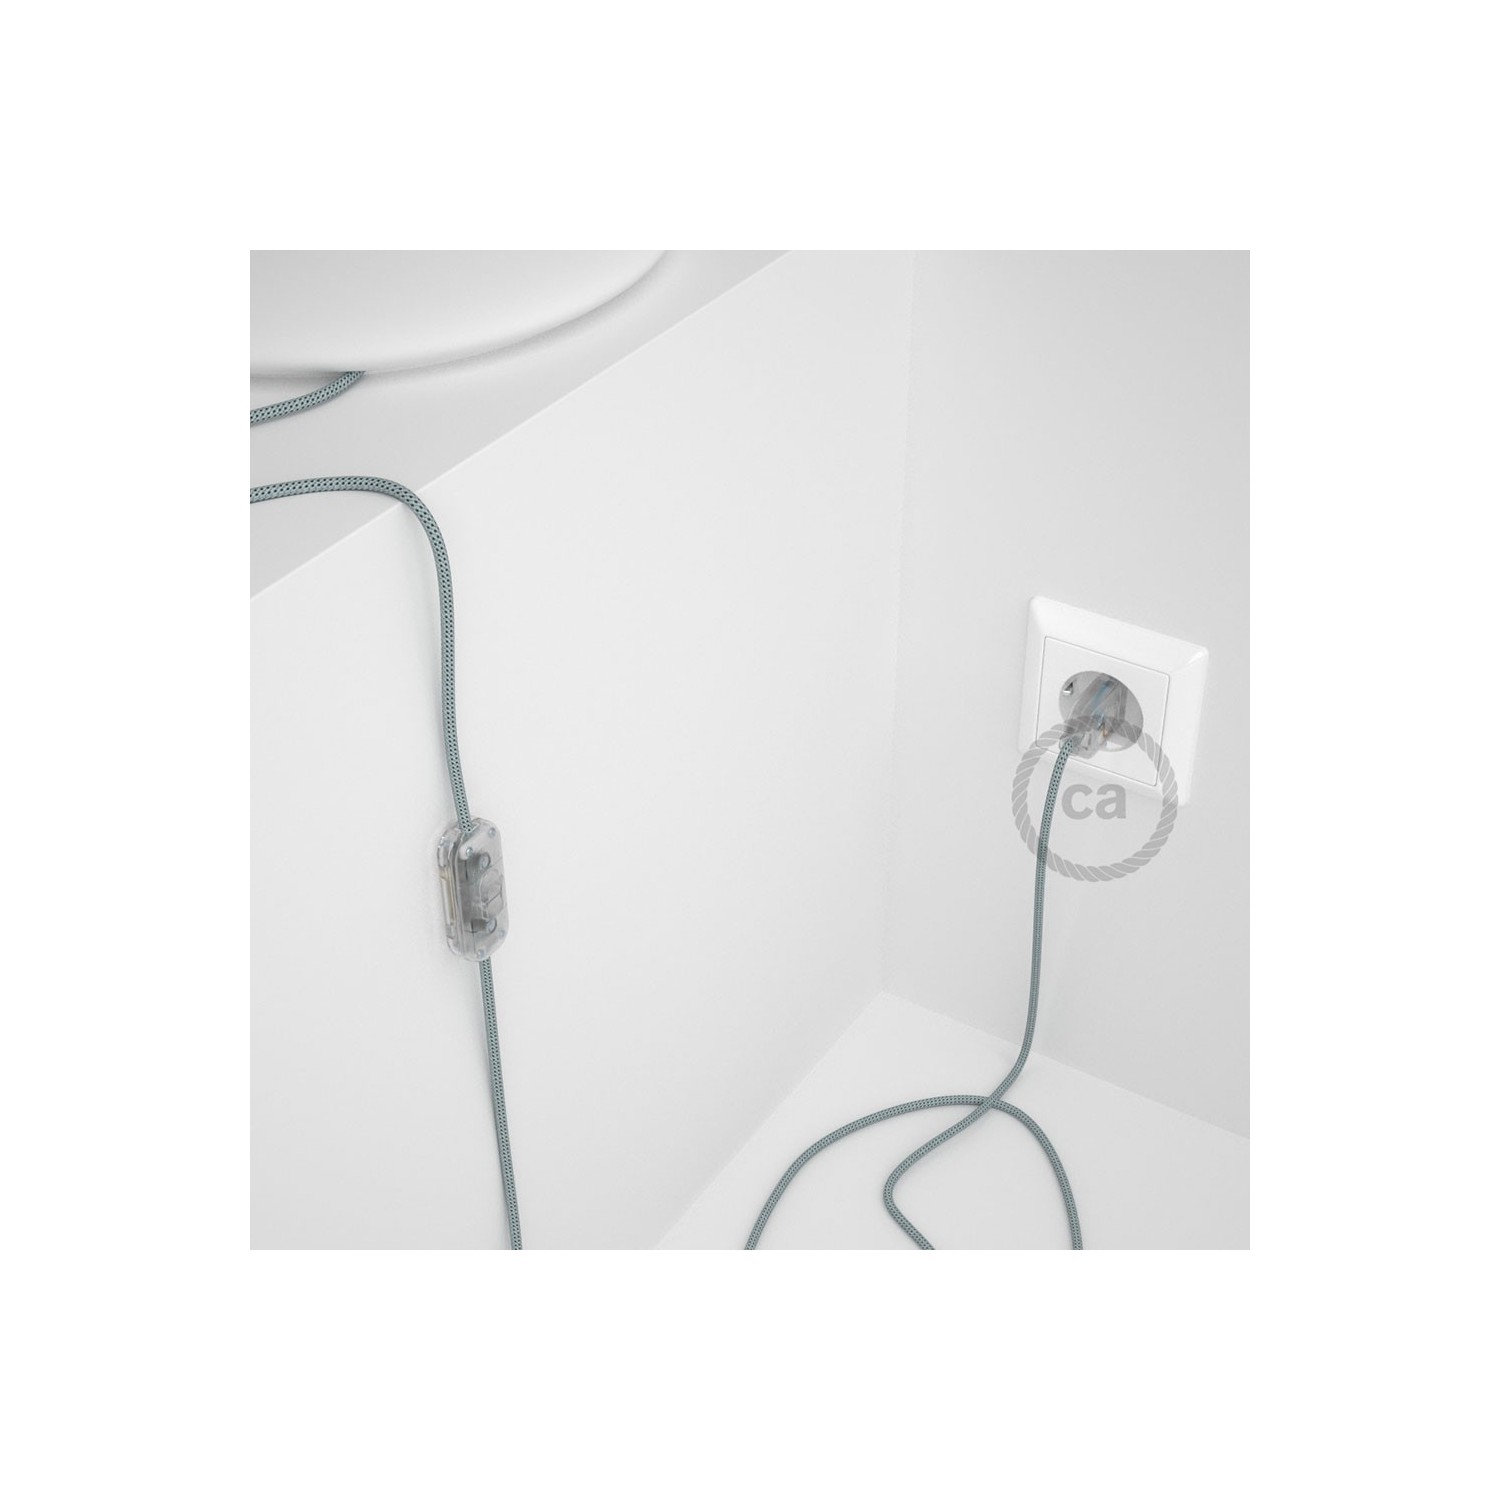 Lamp wiring, RT14 Stracciatella Rayon 1,80 m. Choose the colour of the switch and plug.